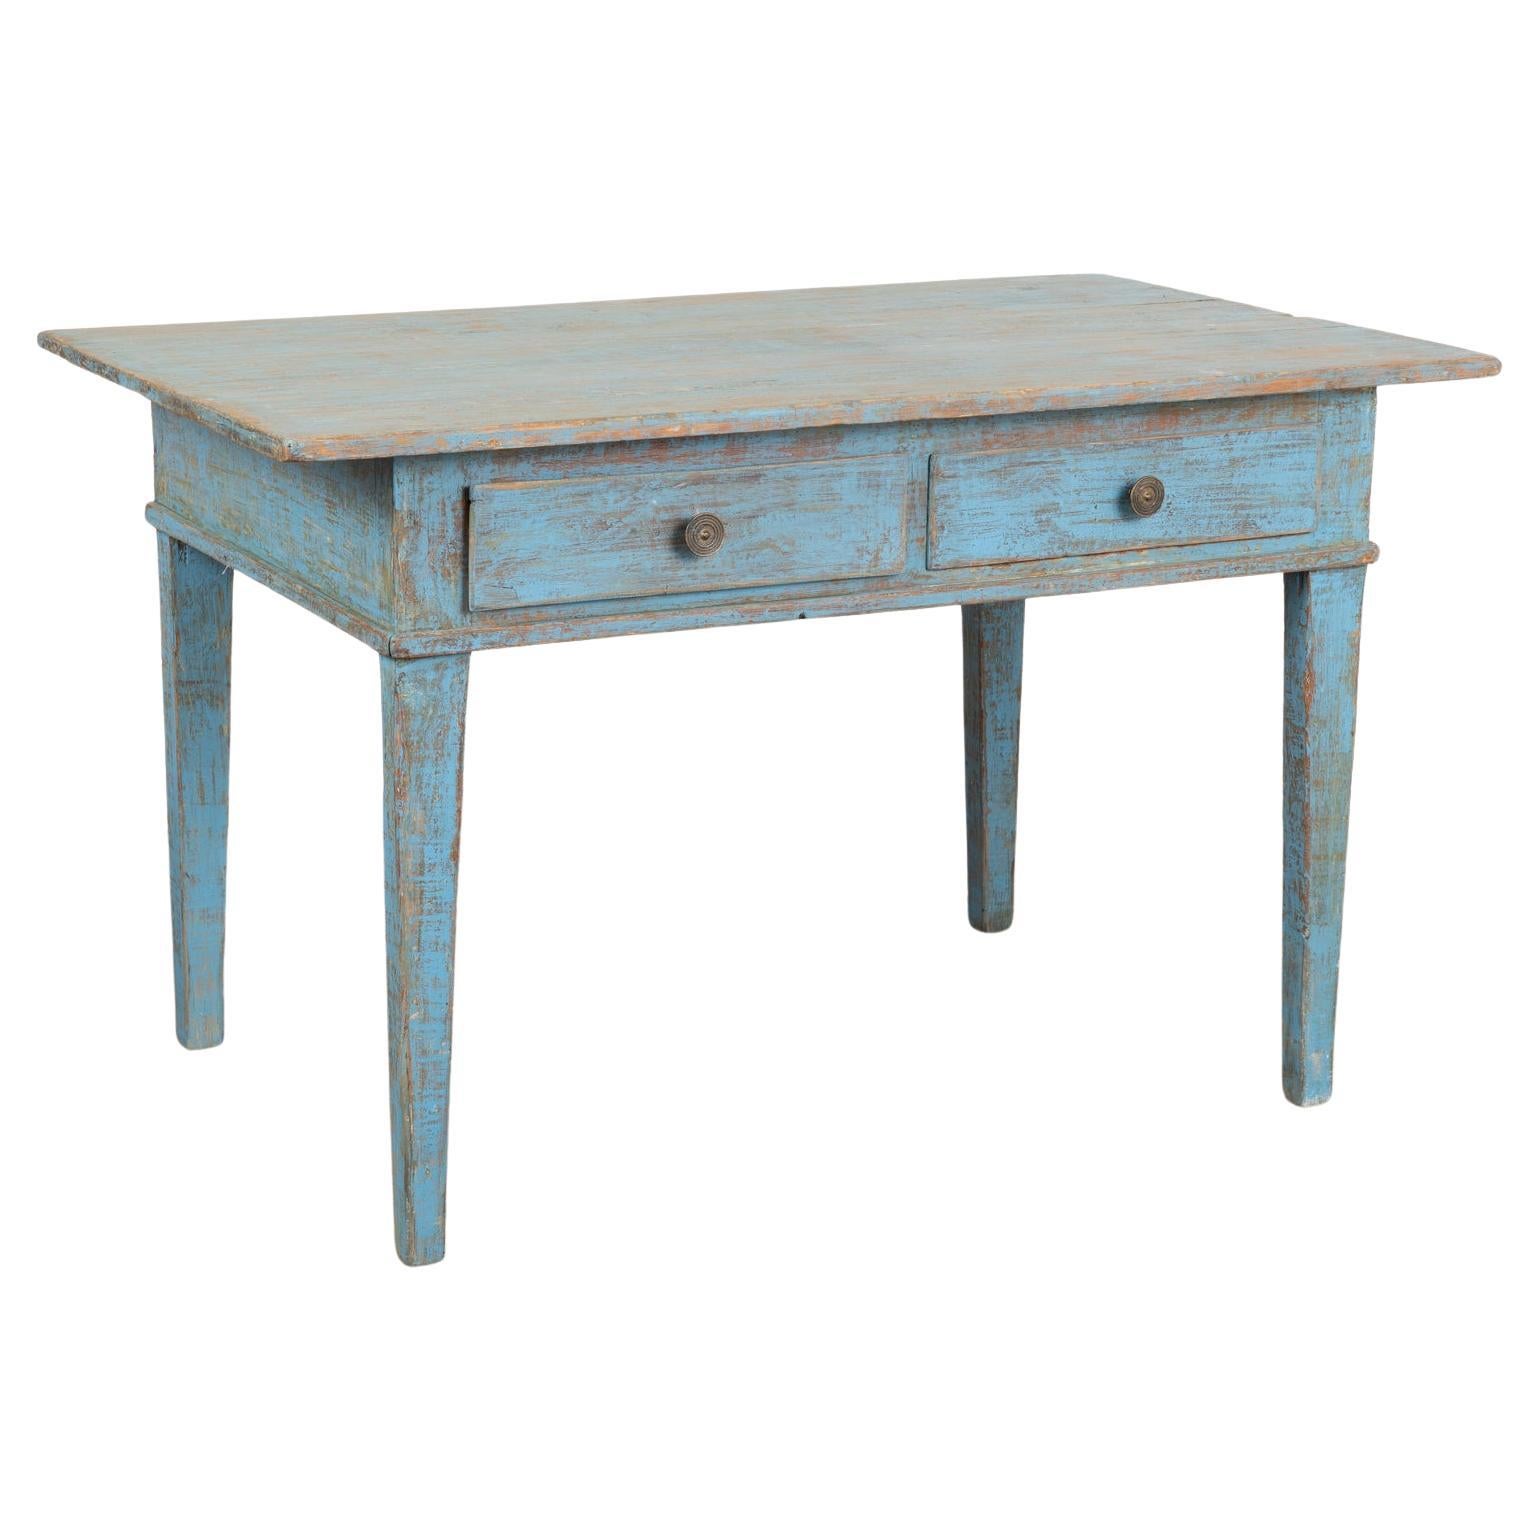 Blue Painted Pine Farm Table Writing Table With 2 Drawers, Sweden circa 1860-80 For Sale